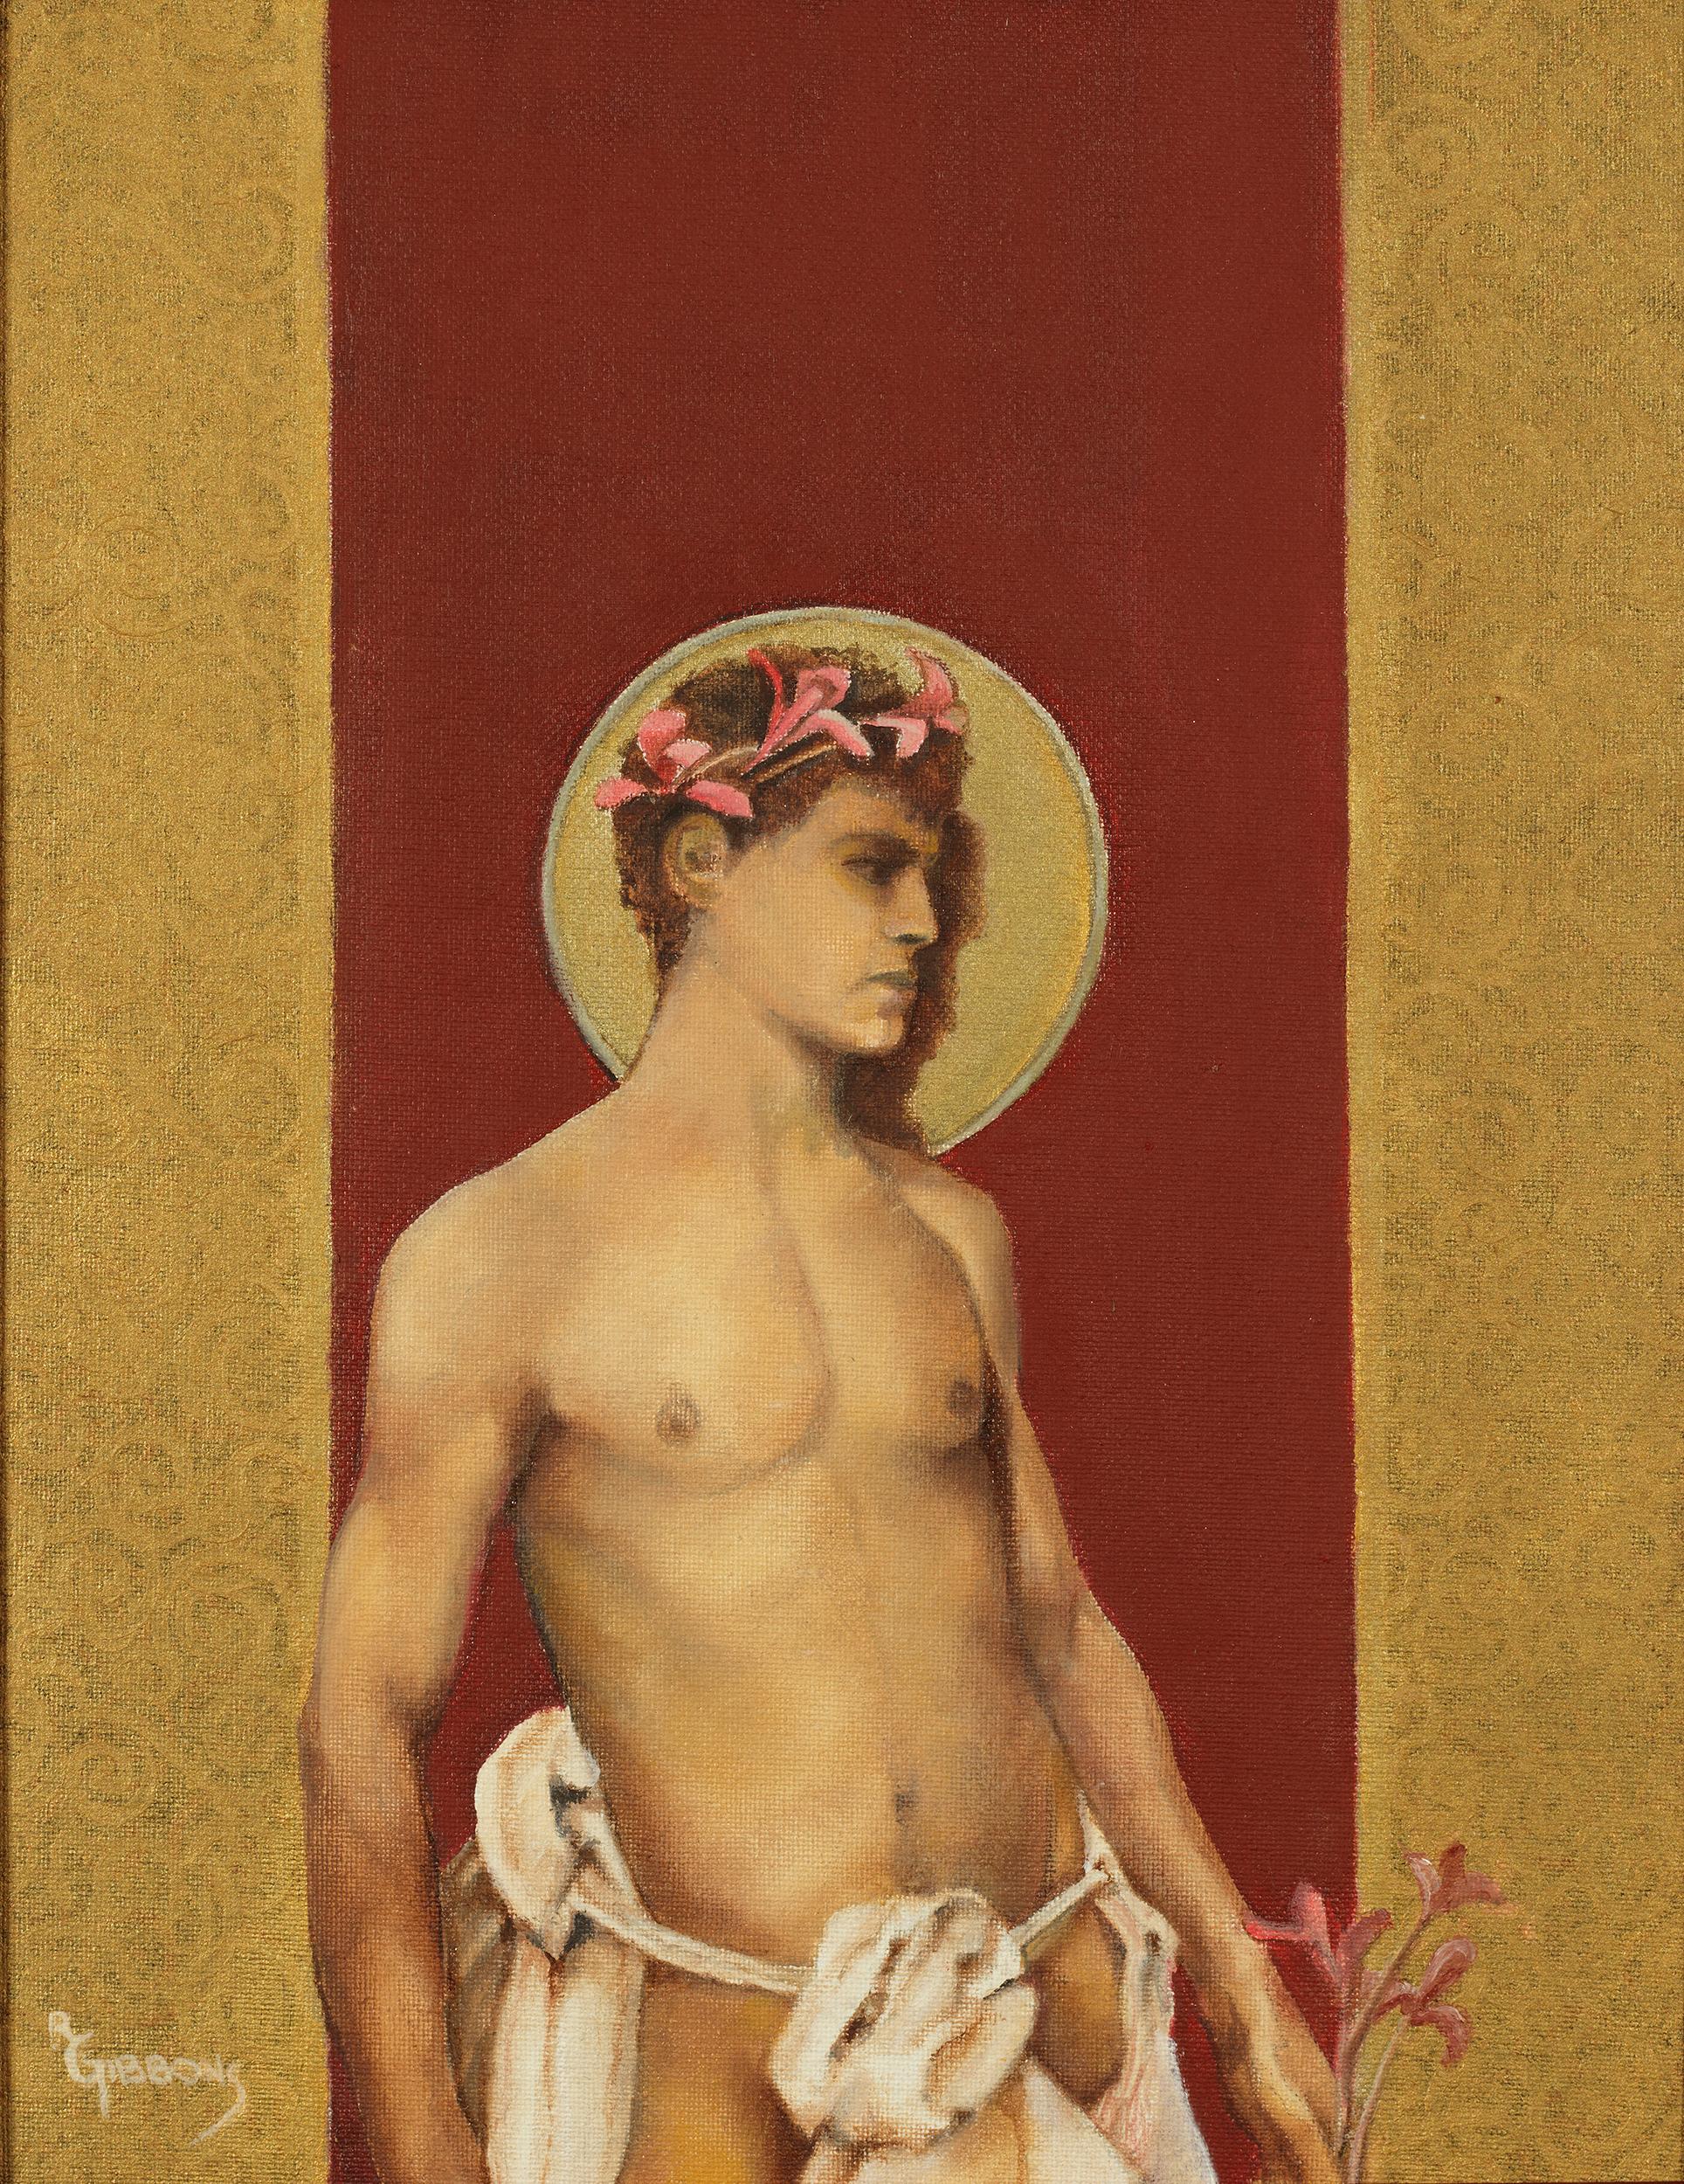 This painting entitled "Saint II" is a semi nude male.  His figure contrasts  with the patterned gold and red background.  His head is surrounded by a halo and adorned with a crown of lilies represent friendship, humility and devotion.  He holds the